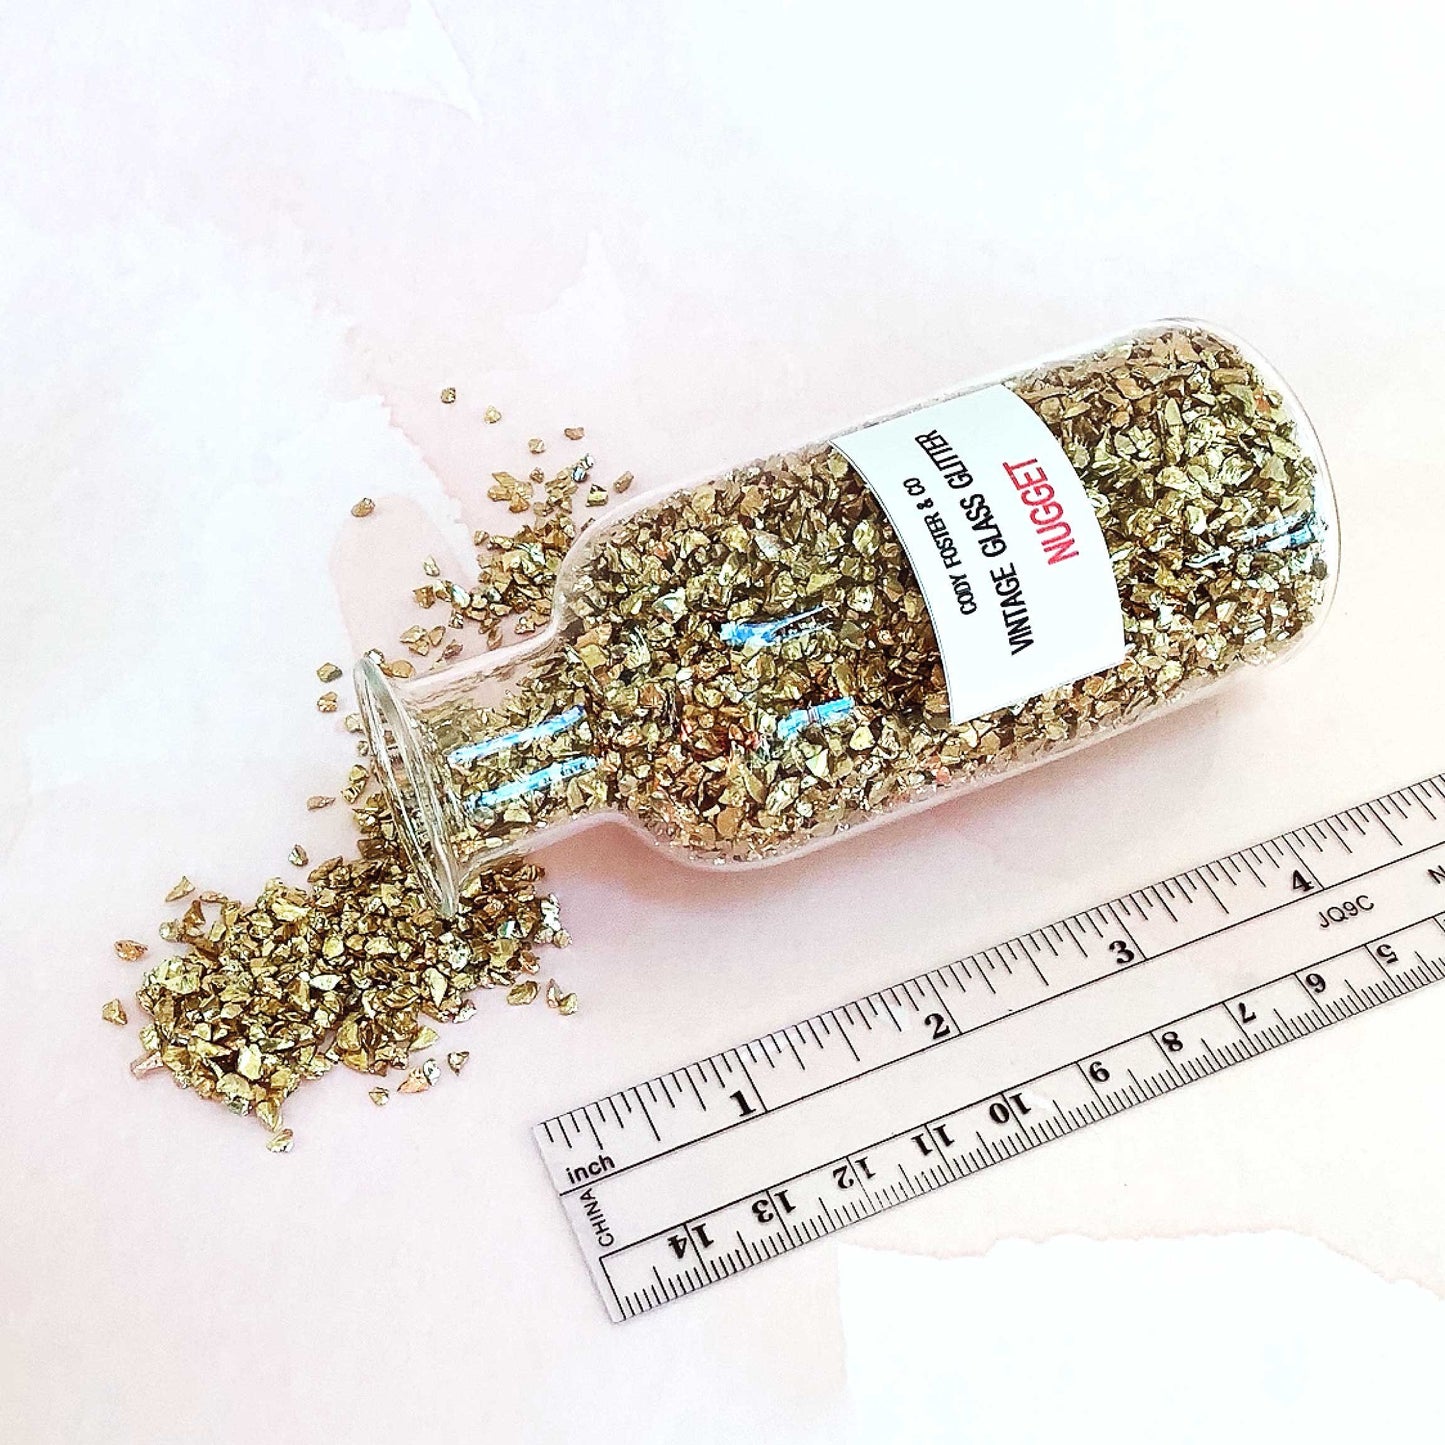 Gold Glass Glitter Nuggets for Crafting - Decor - Packaging